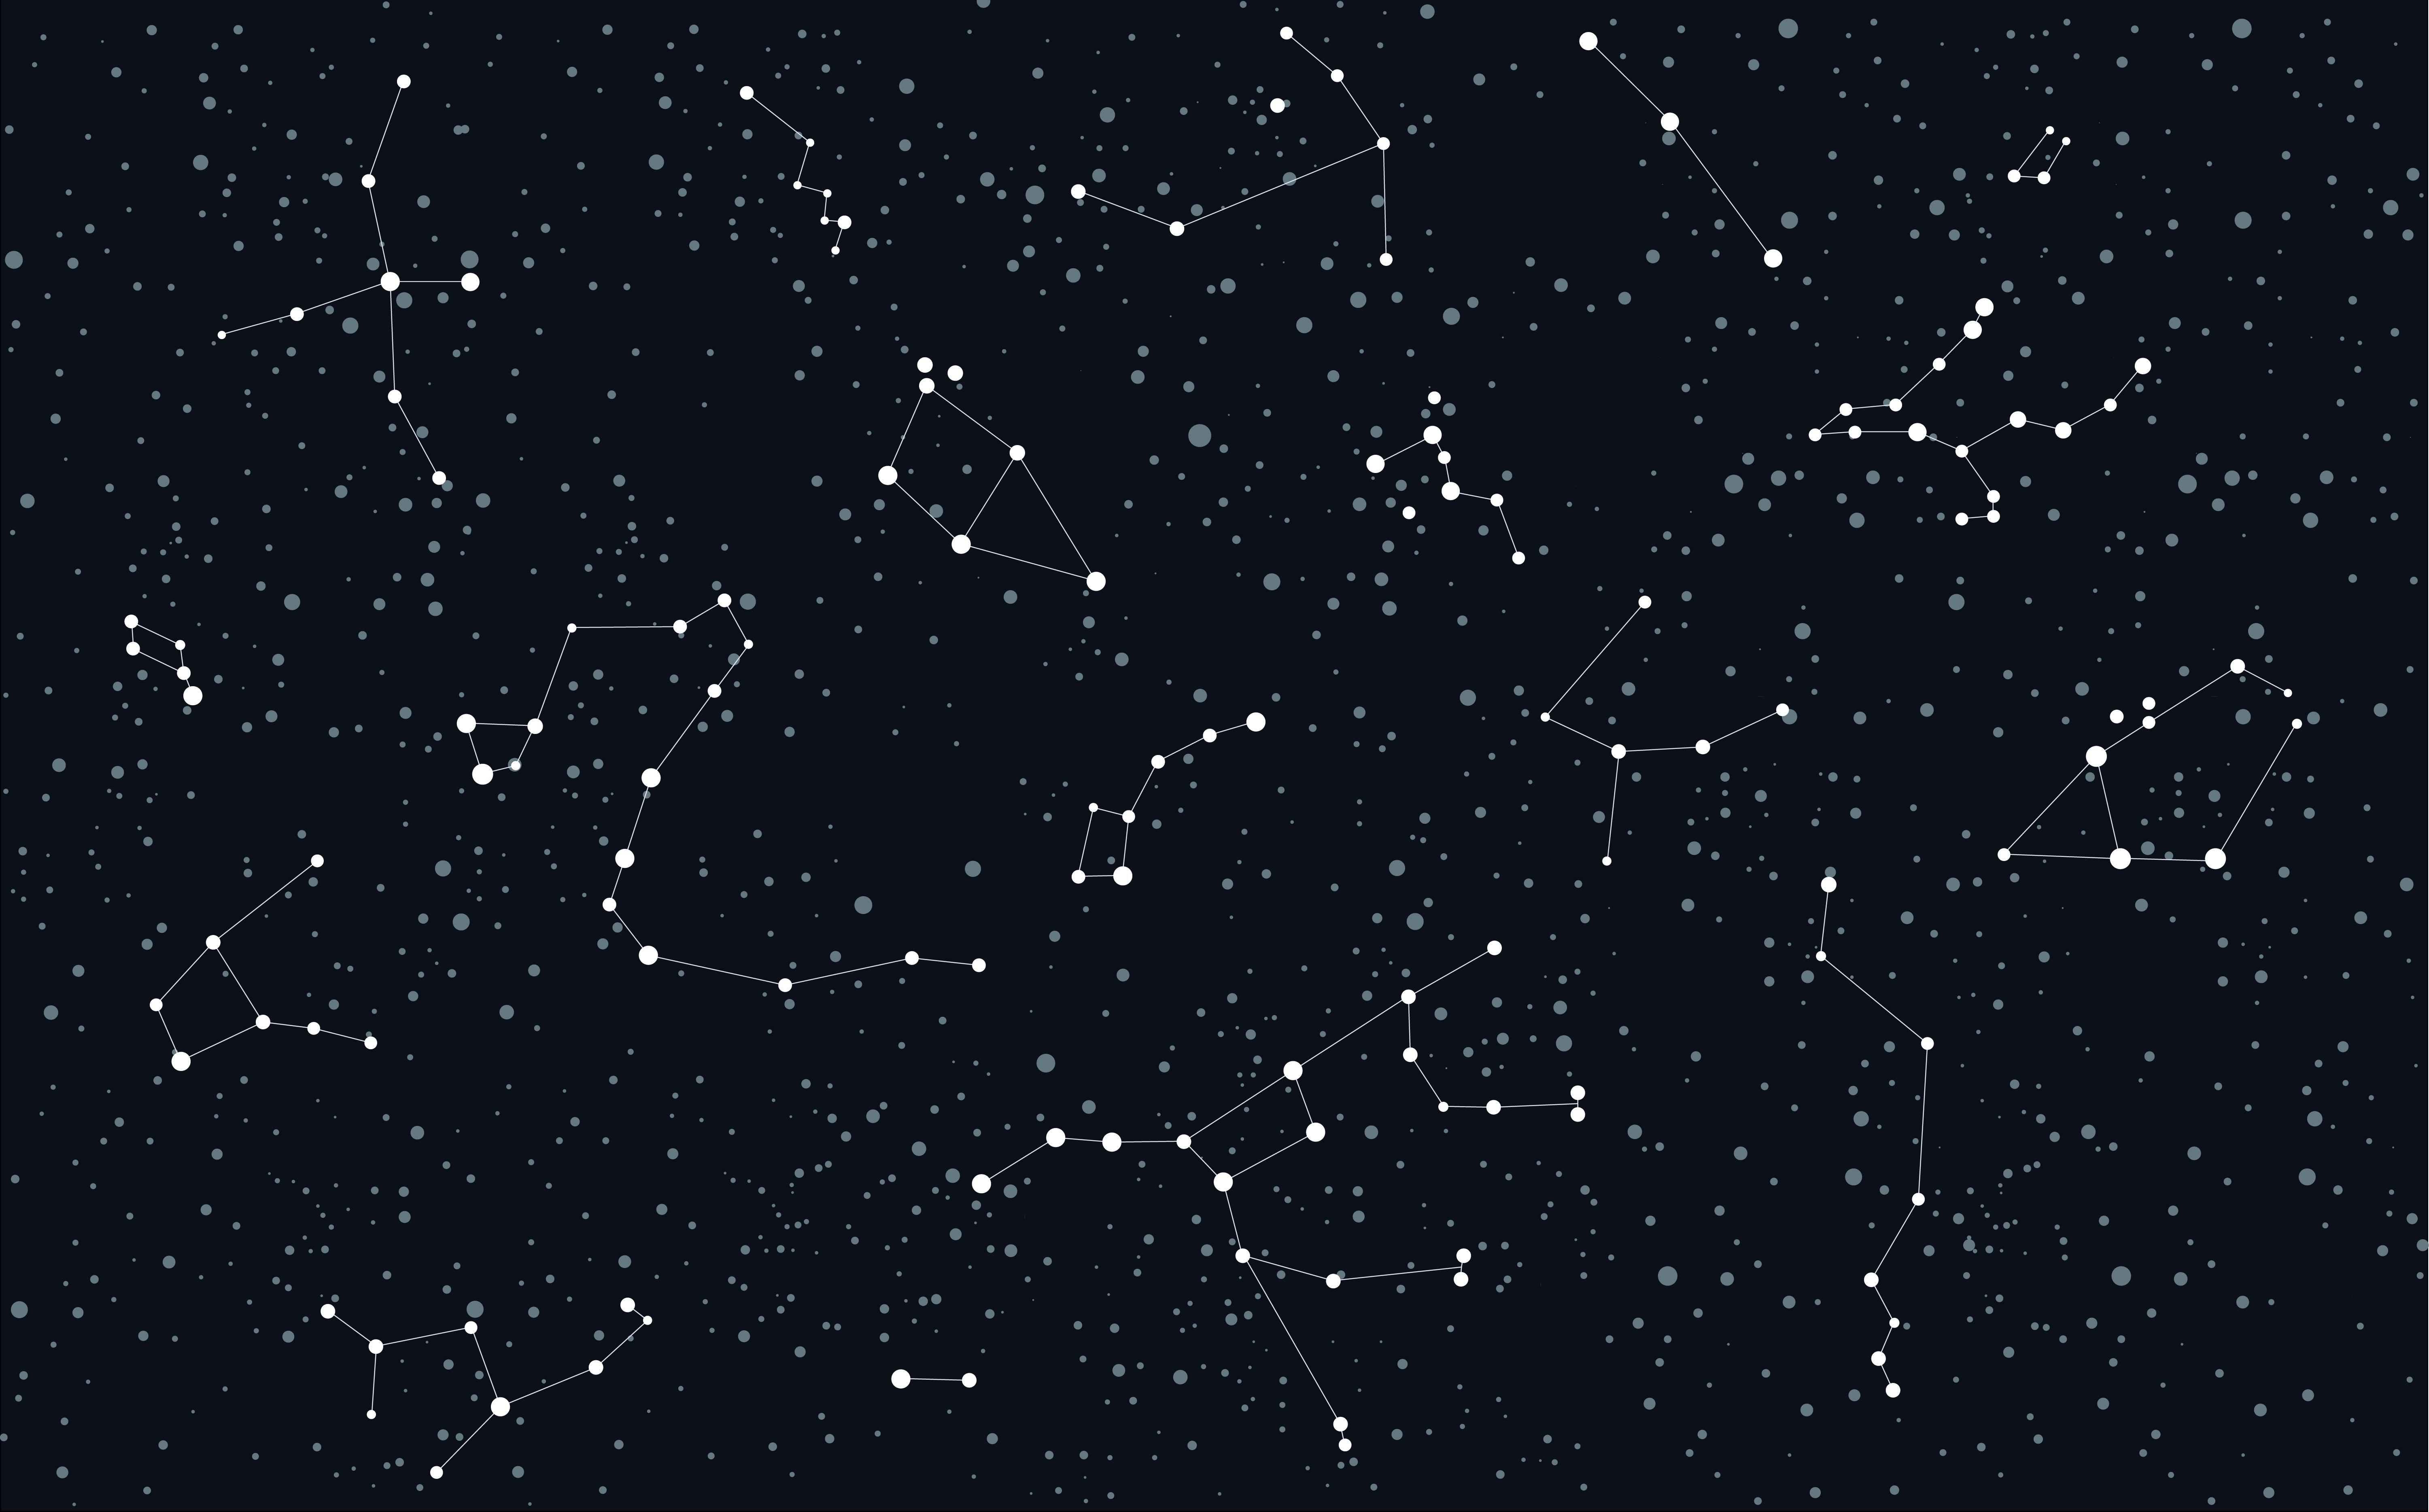 Star Constellation Wallpapers Top Free Star Constellation Backgrounds